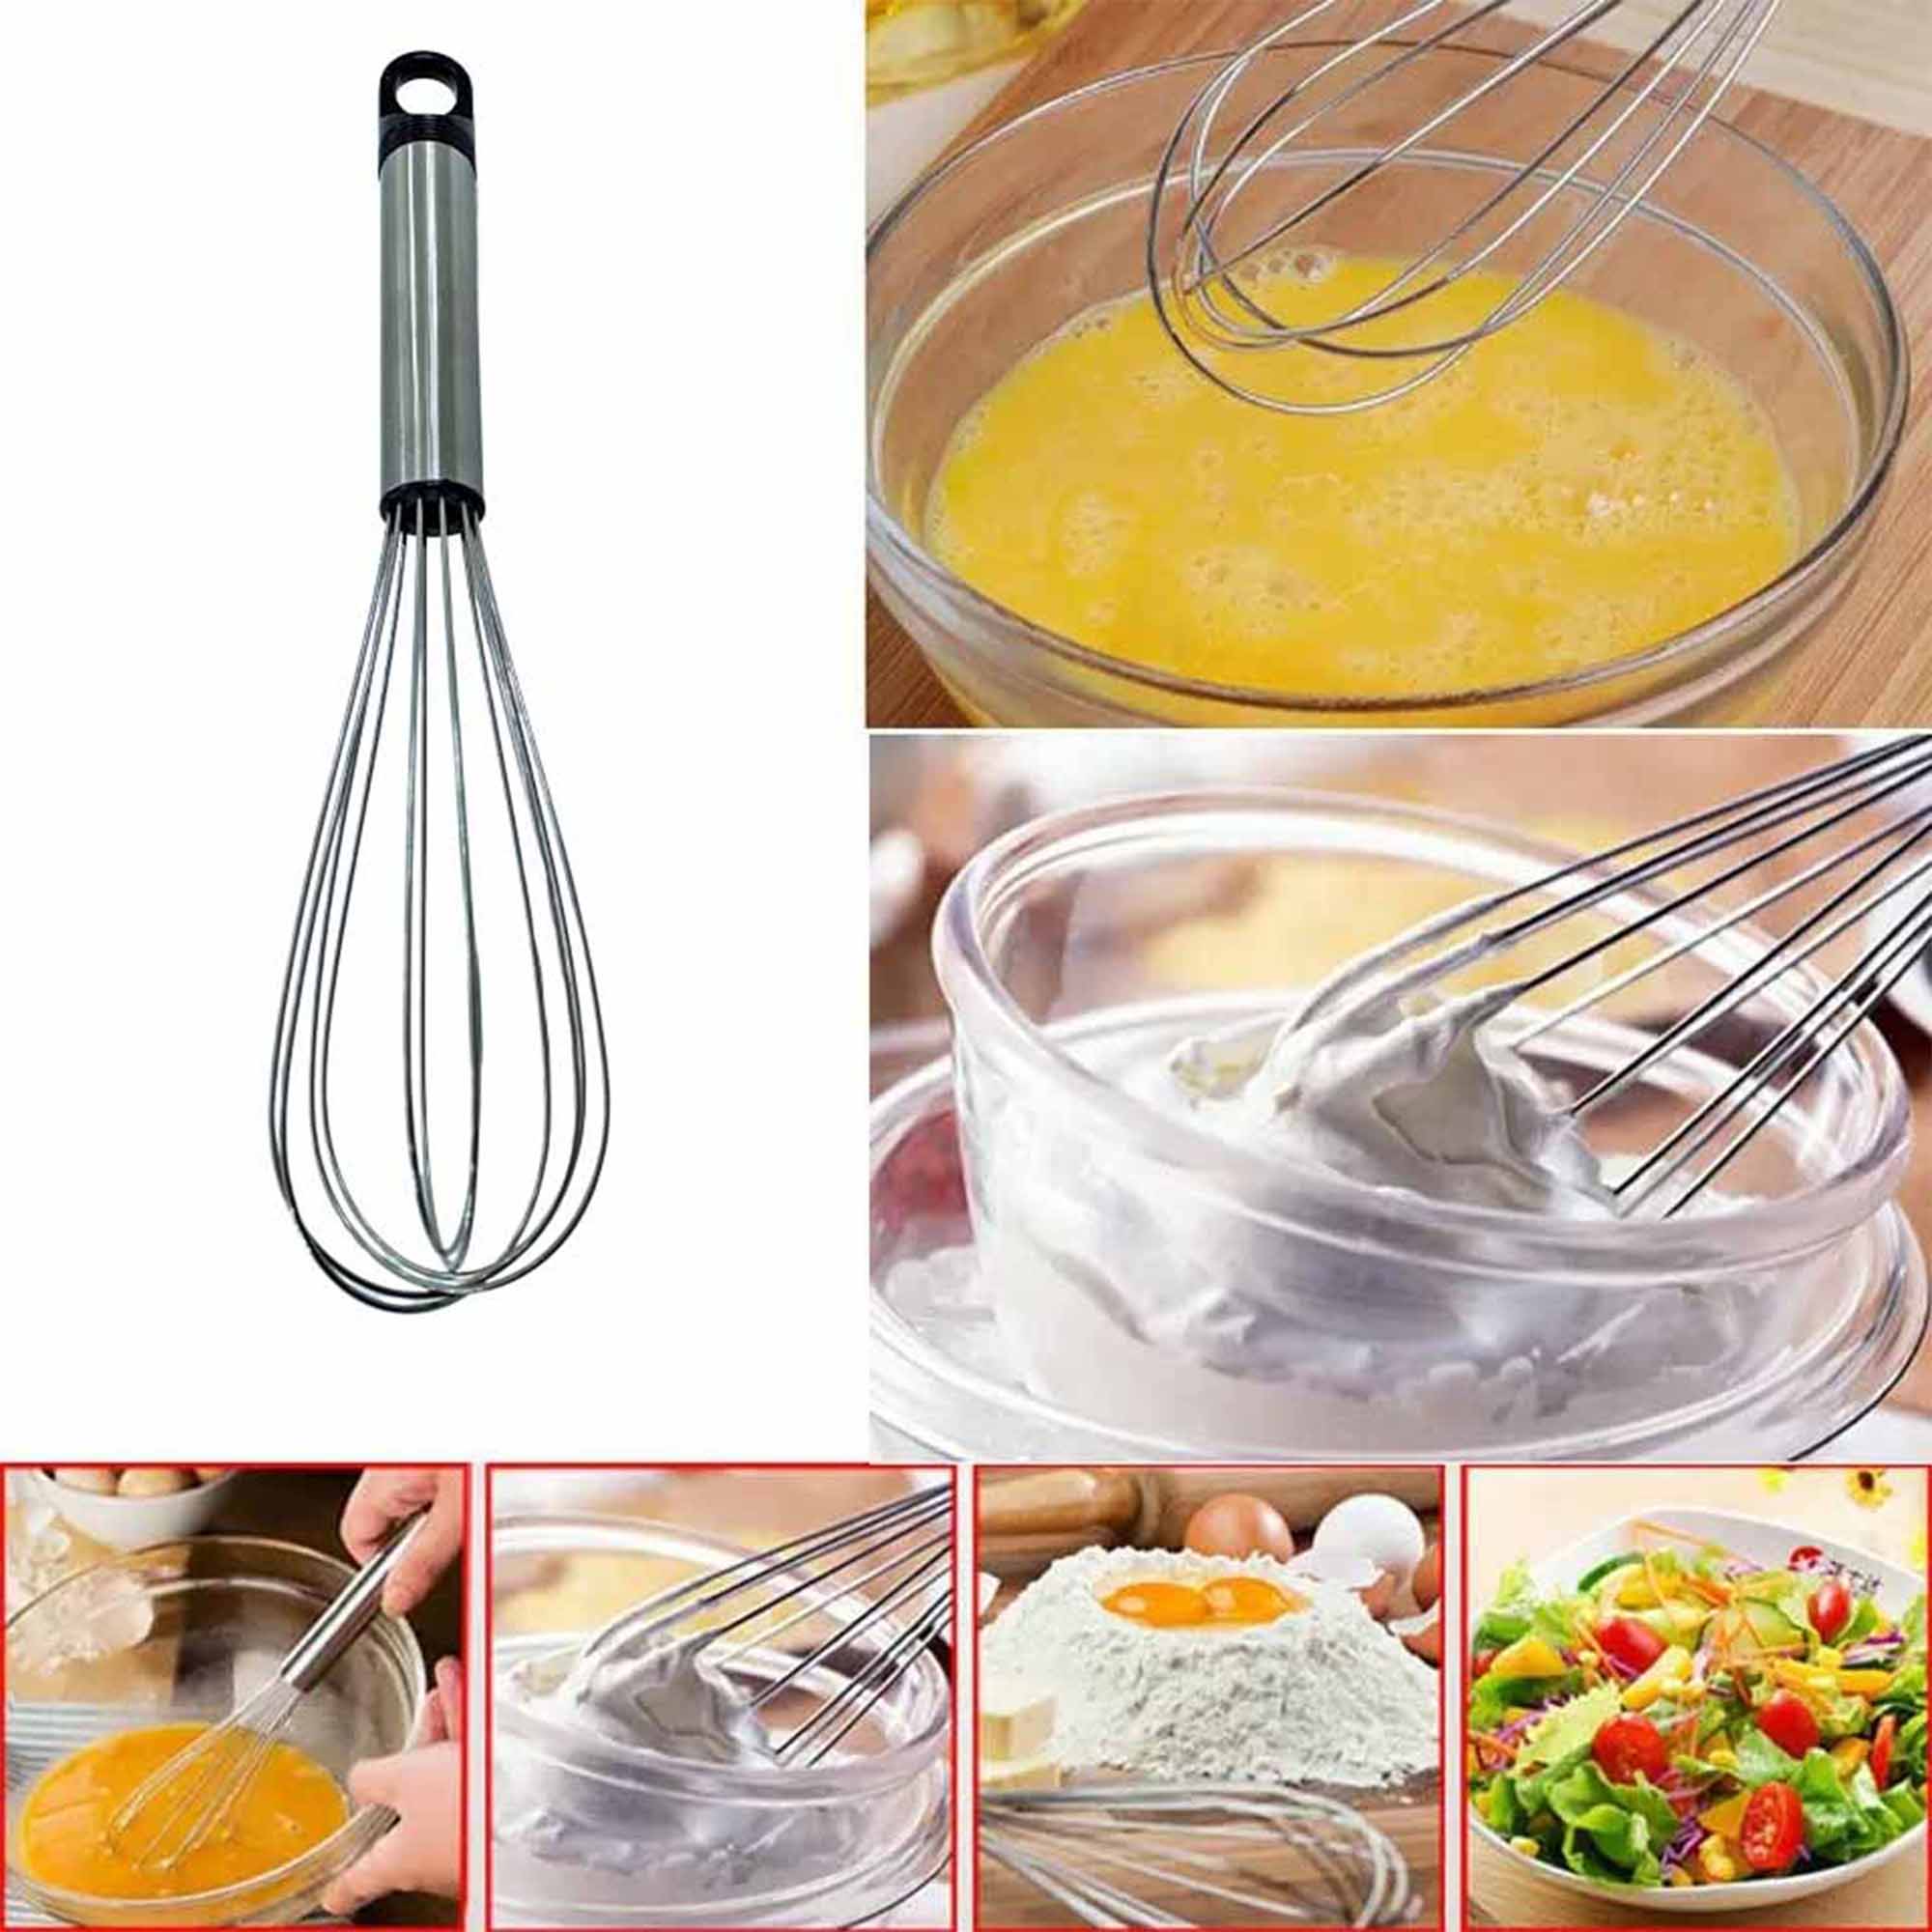 Stainless Steel Kitchen Whisk with Manual hand egg beater Mixer Stirring Tool Egg Cream Mixer Stirrer Sauce Beater kitchen accessories Baking Tools & Accessories NowBuy.lk 4